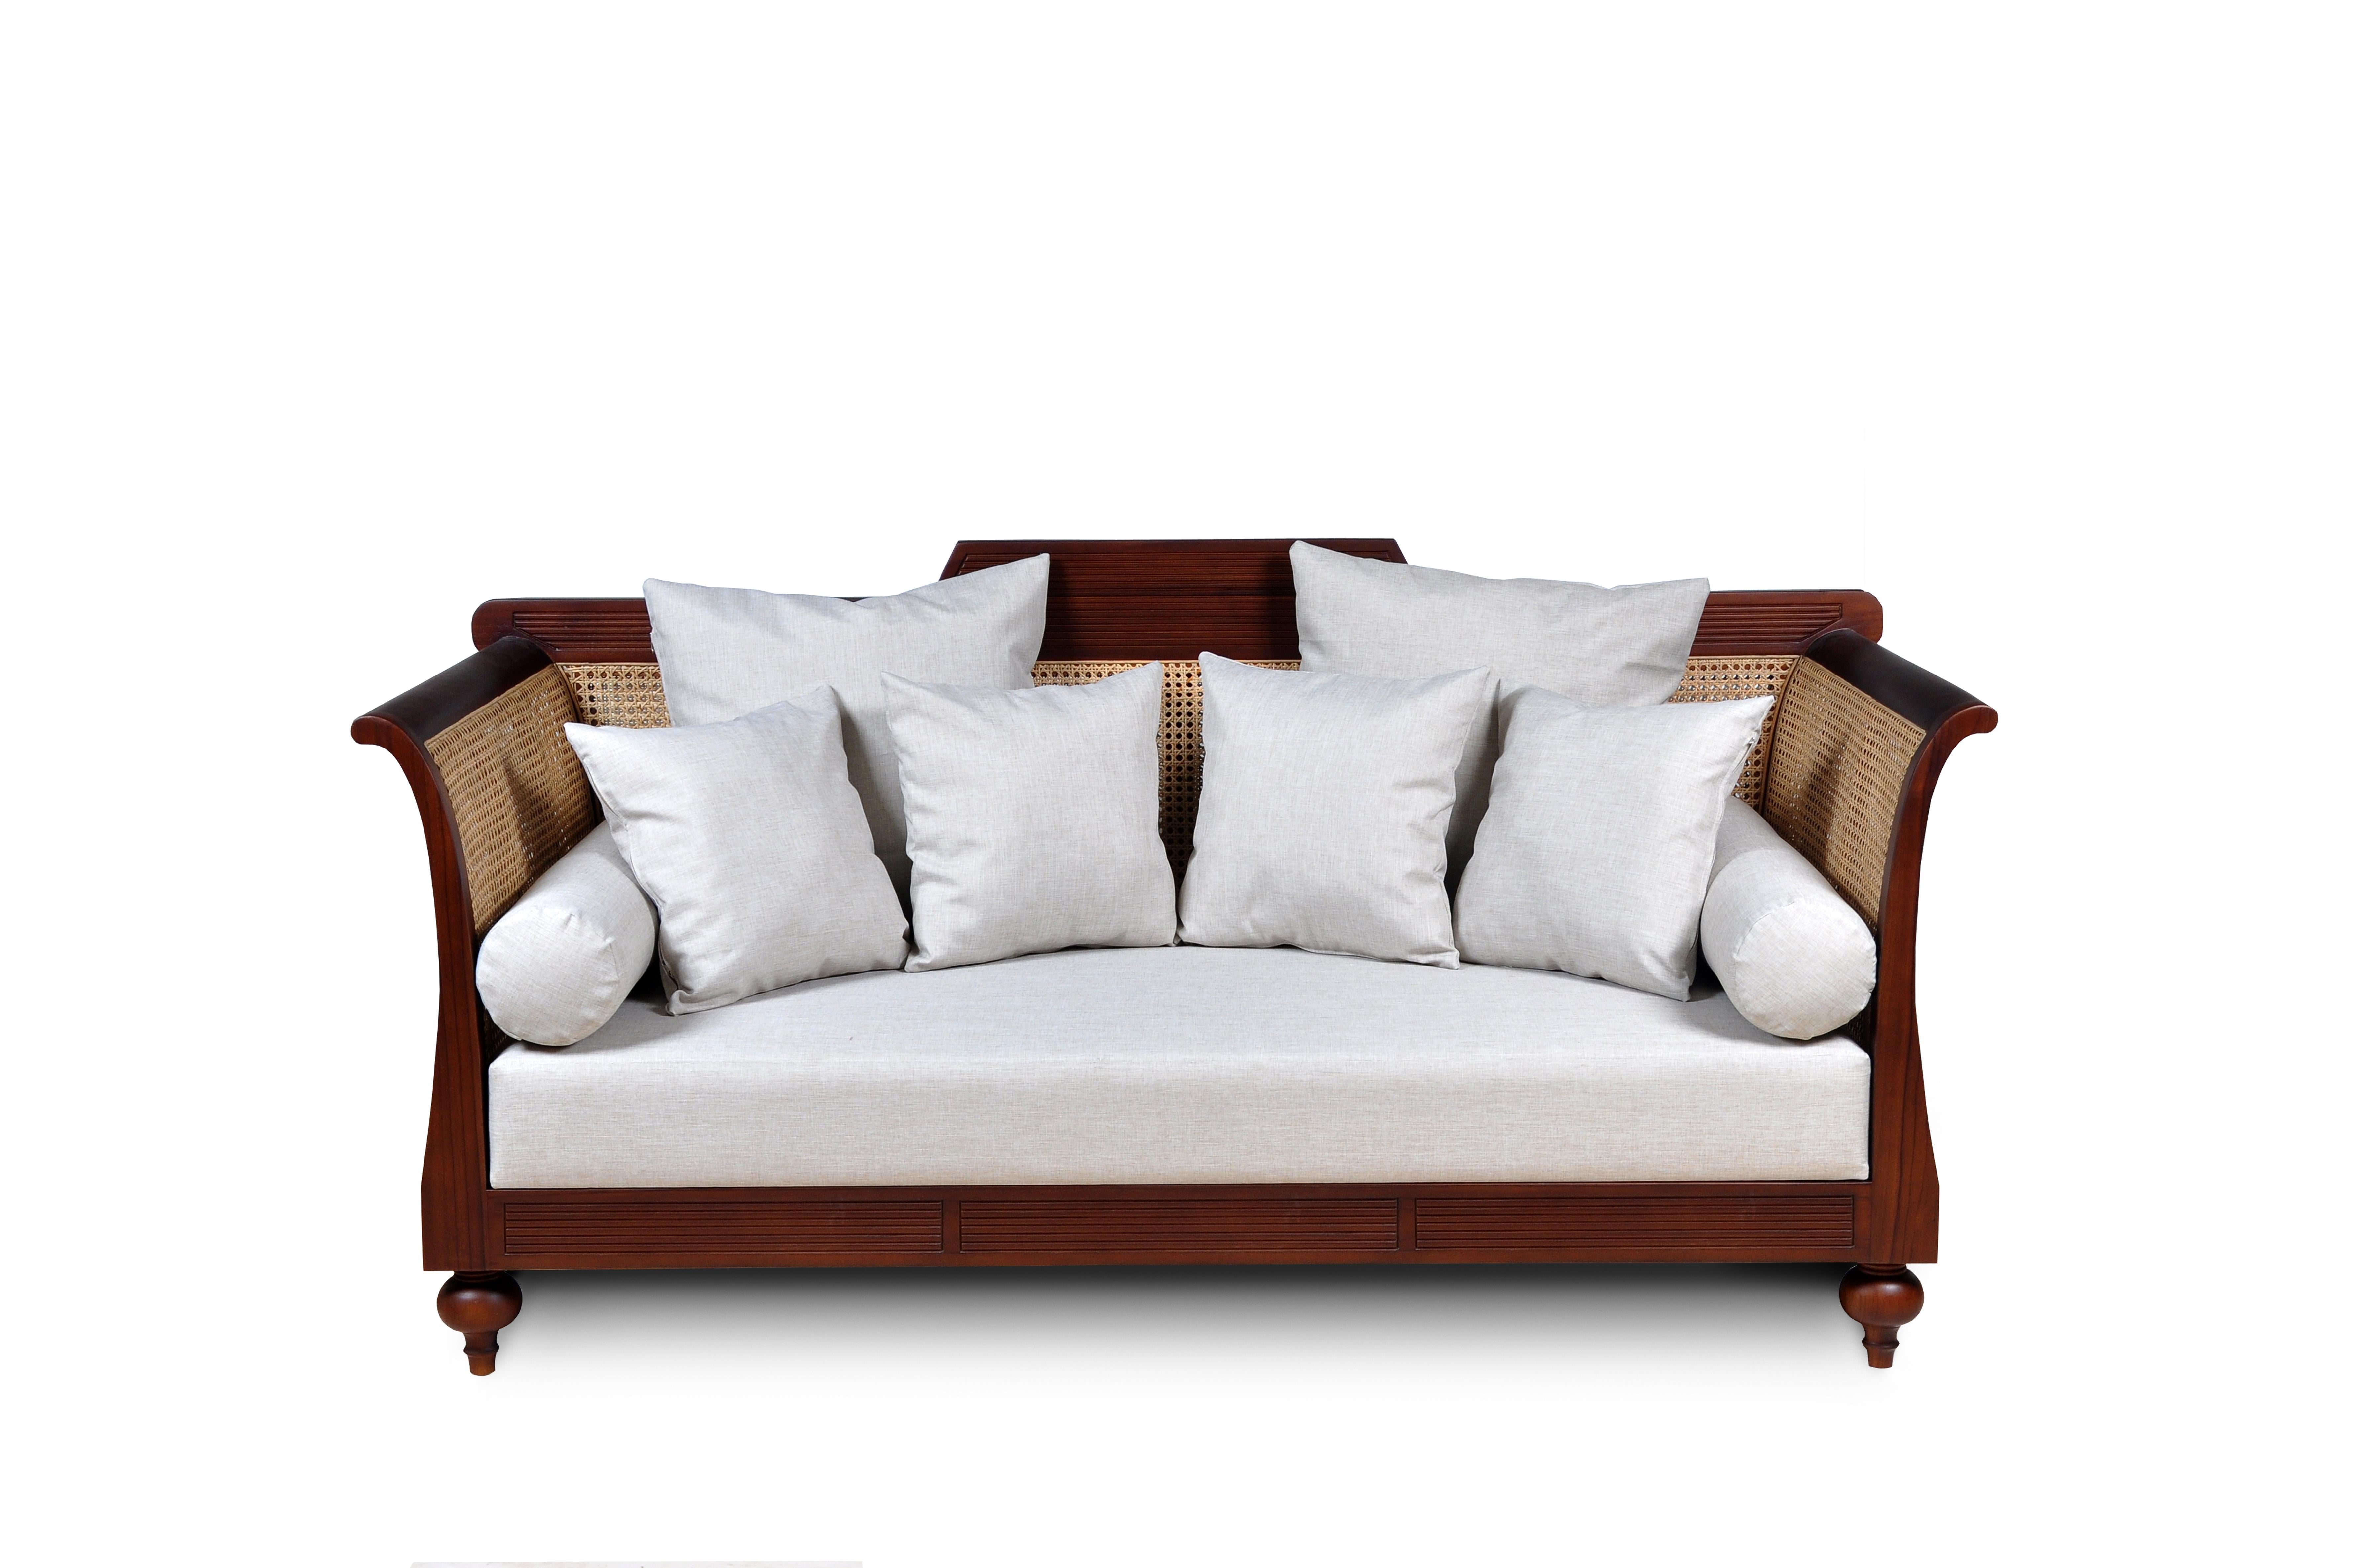 This classic, colonial style daybed has a tropical vibe that will bring romantic whimsy to your room. Made from sustainably sourced teak and natural hand woven cane (a fast growing, renewable resource), it also comes with two bolster pillows and six